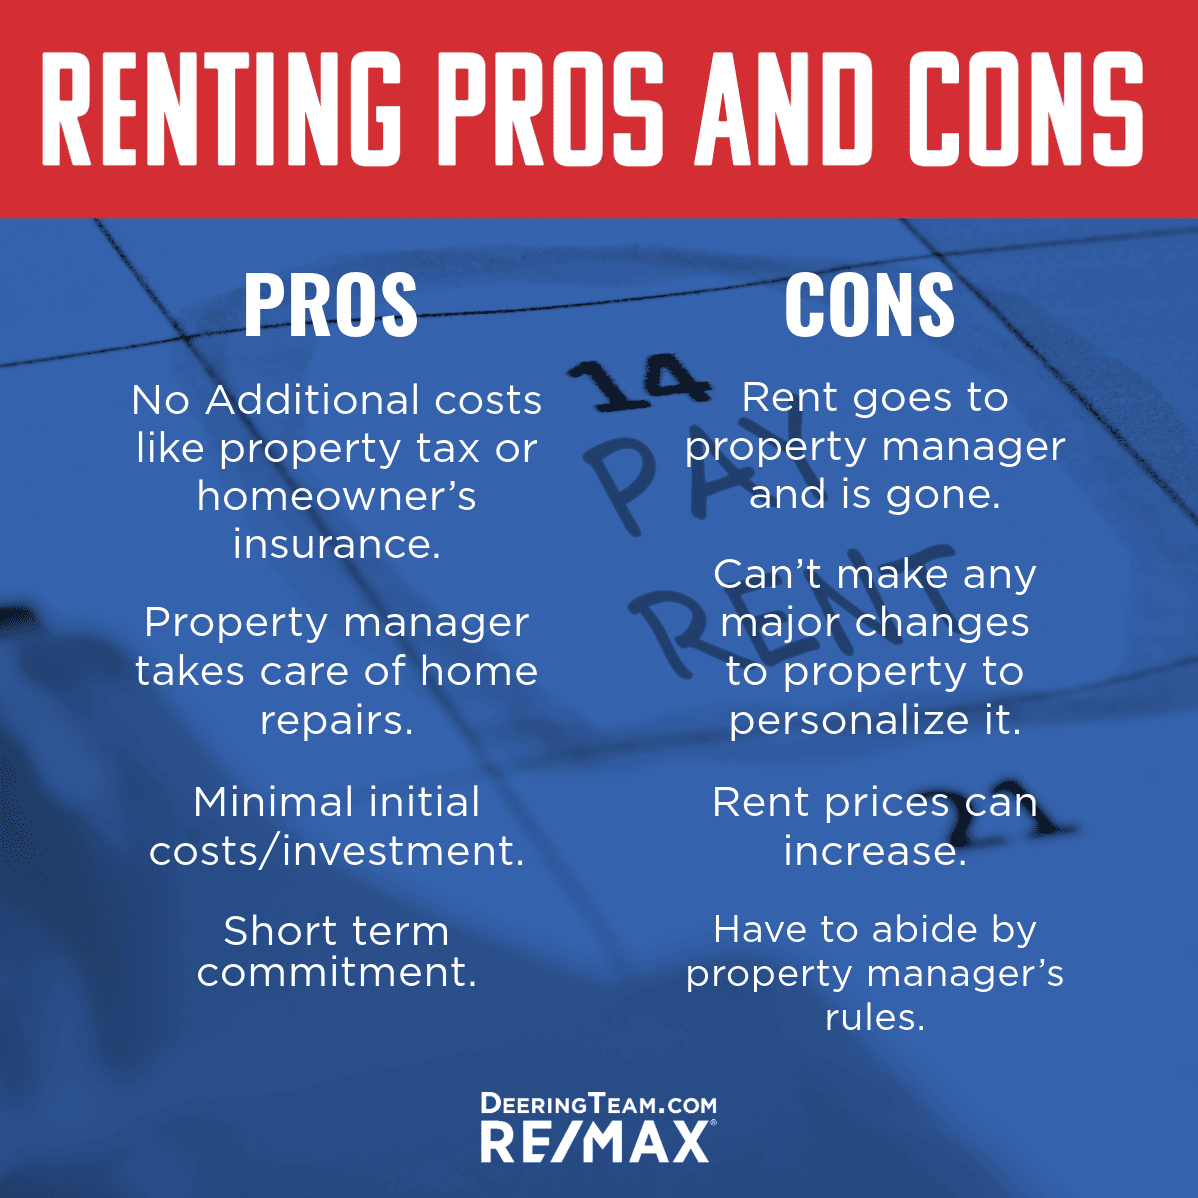 Rental pros and cons